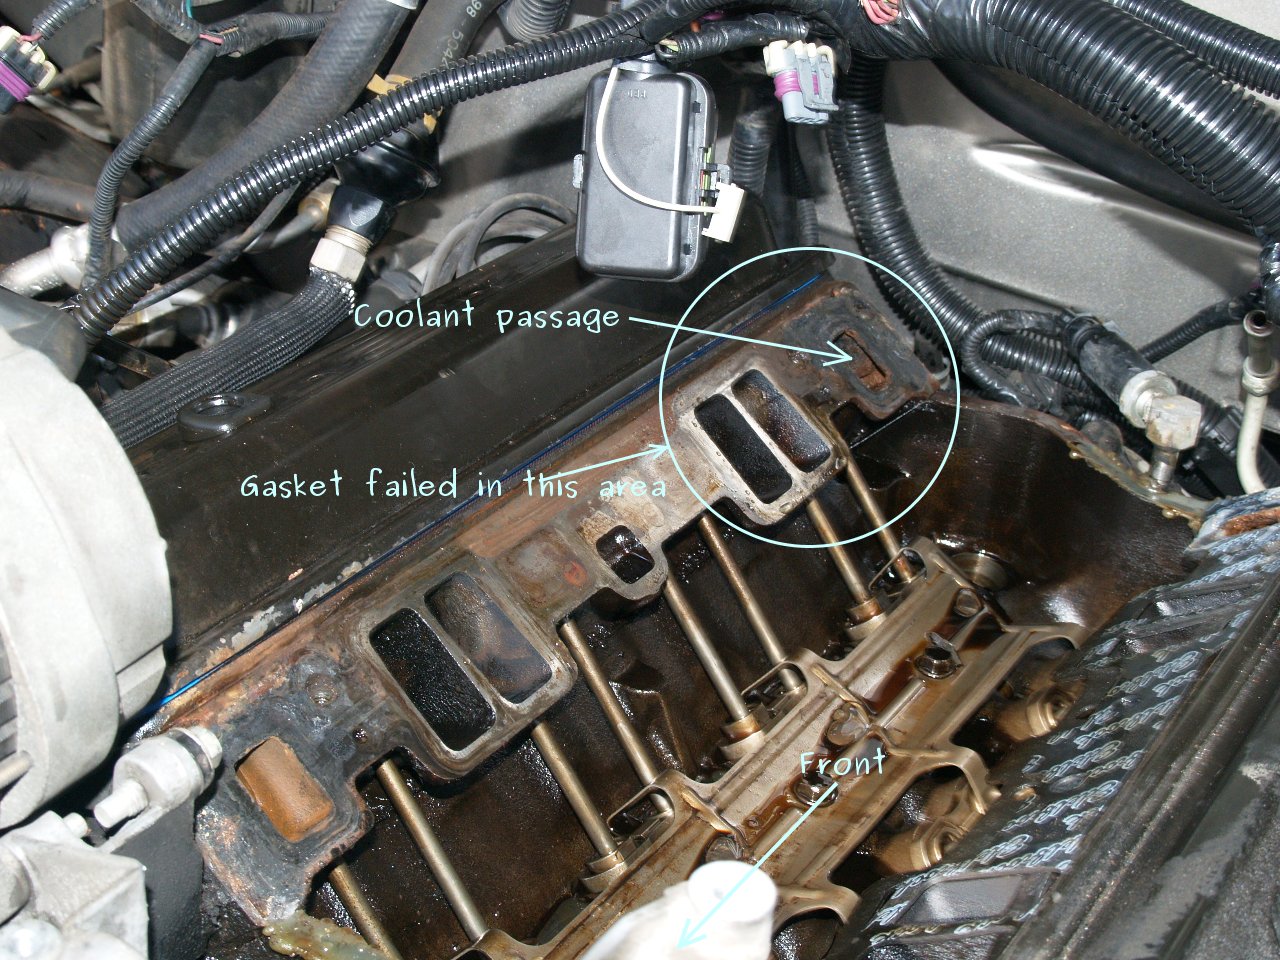 See P007F in engine